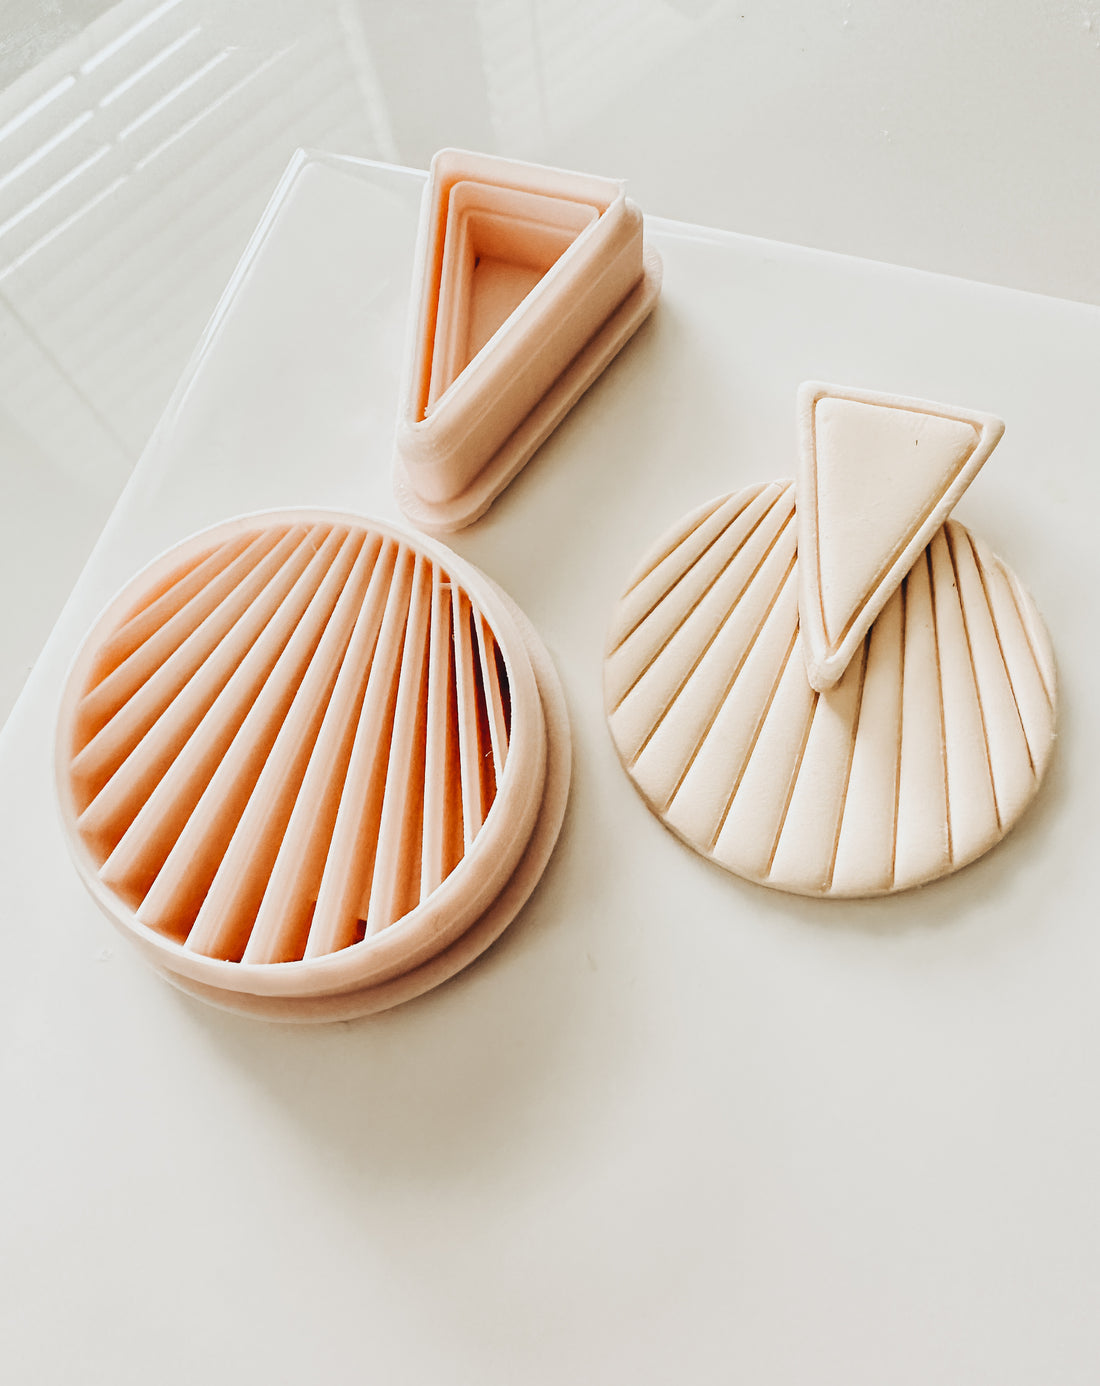 Reese Embossed Stackable Clay Cutter Set